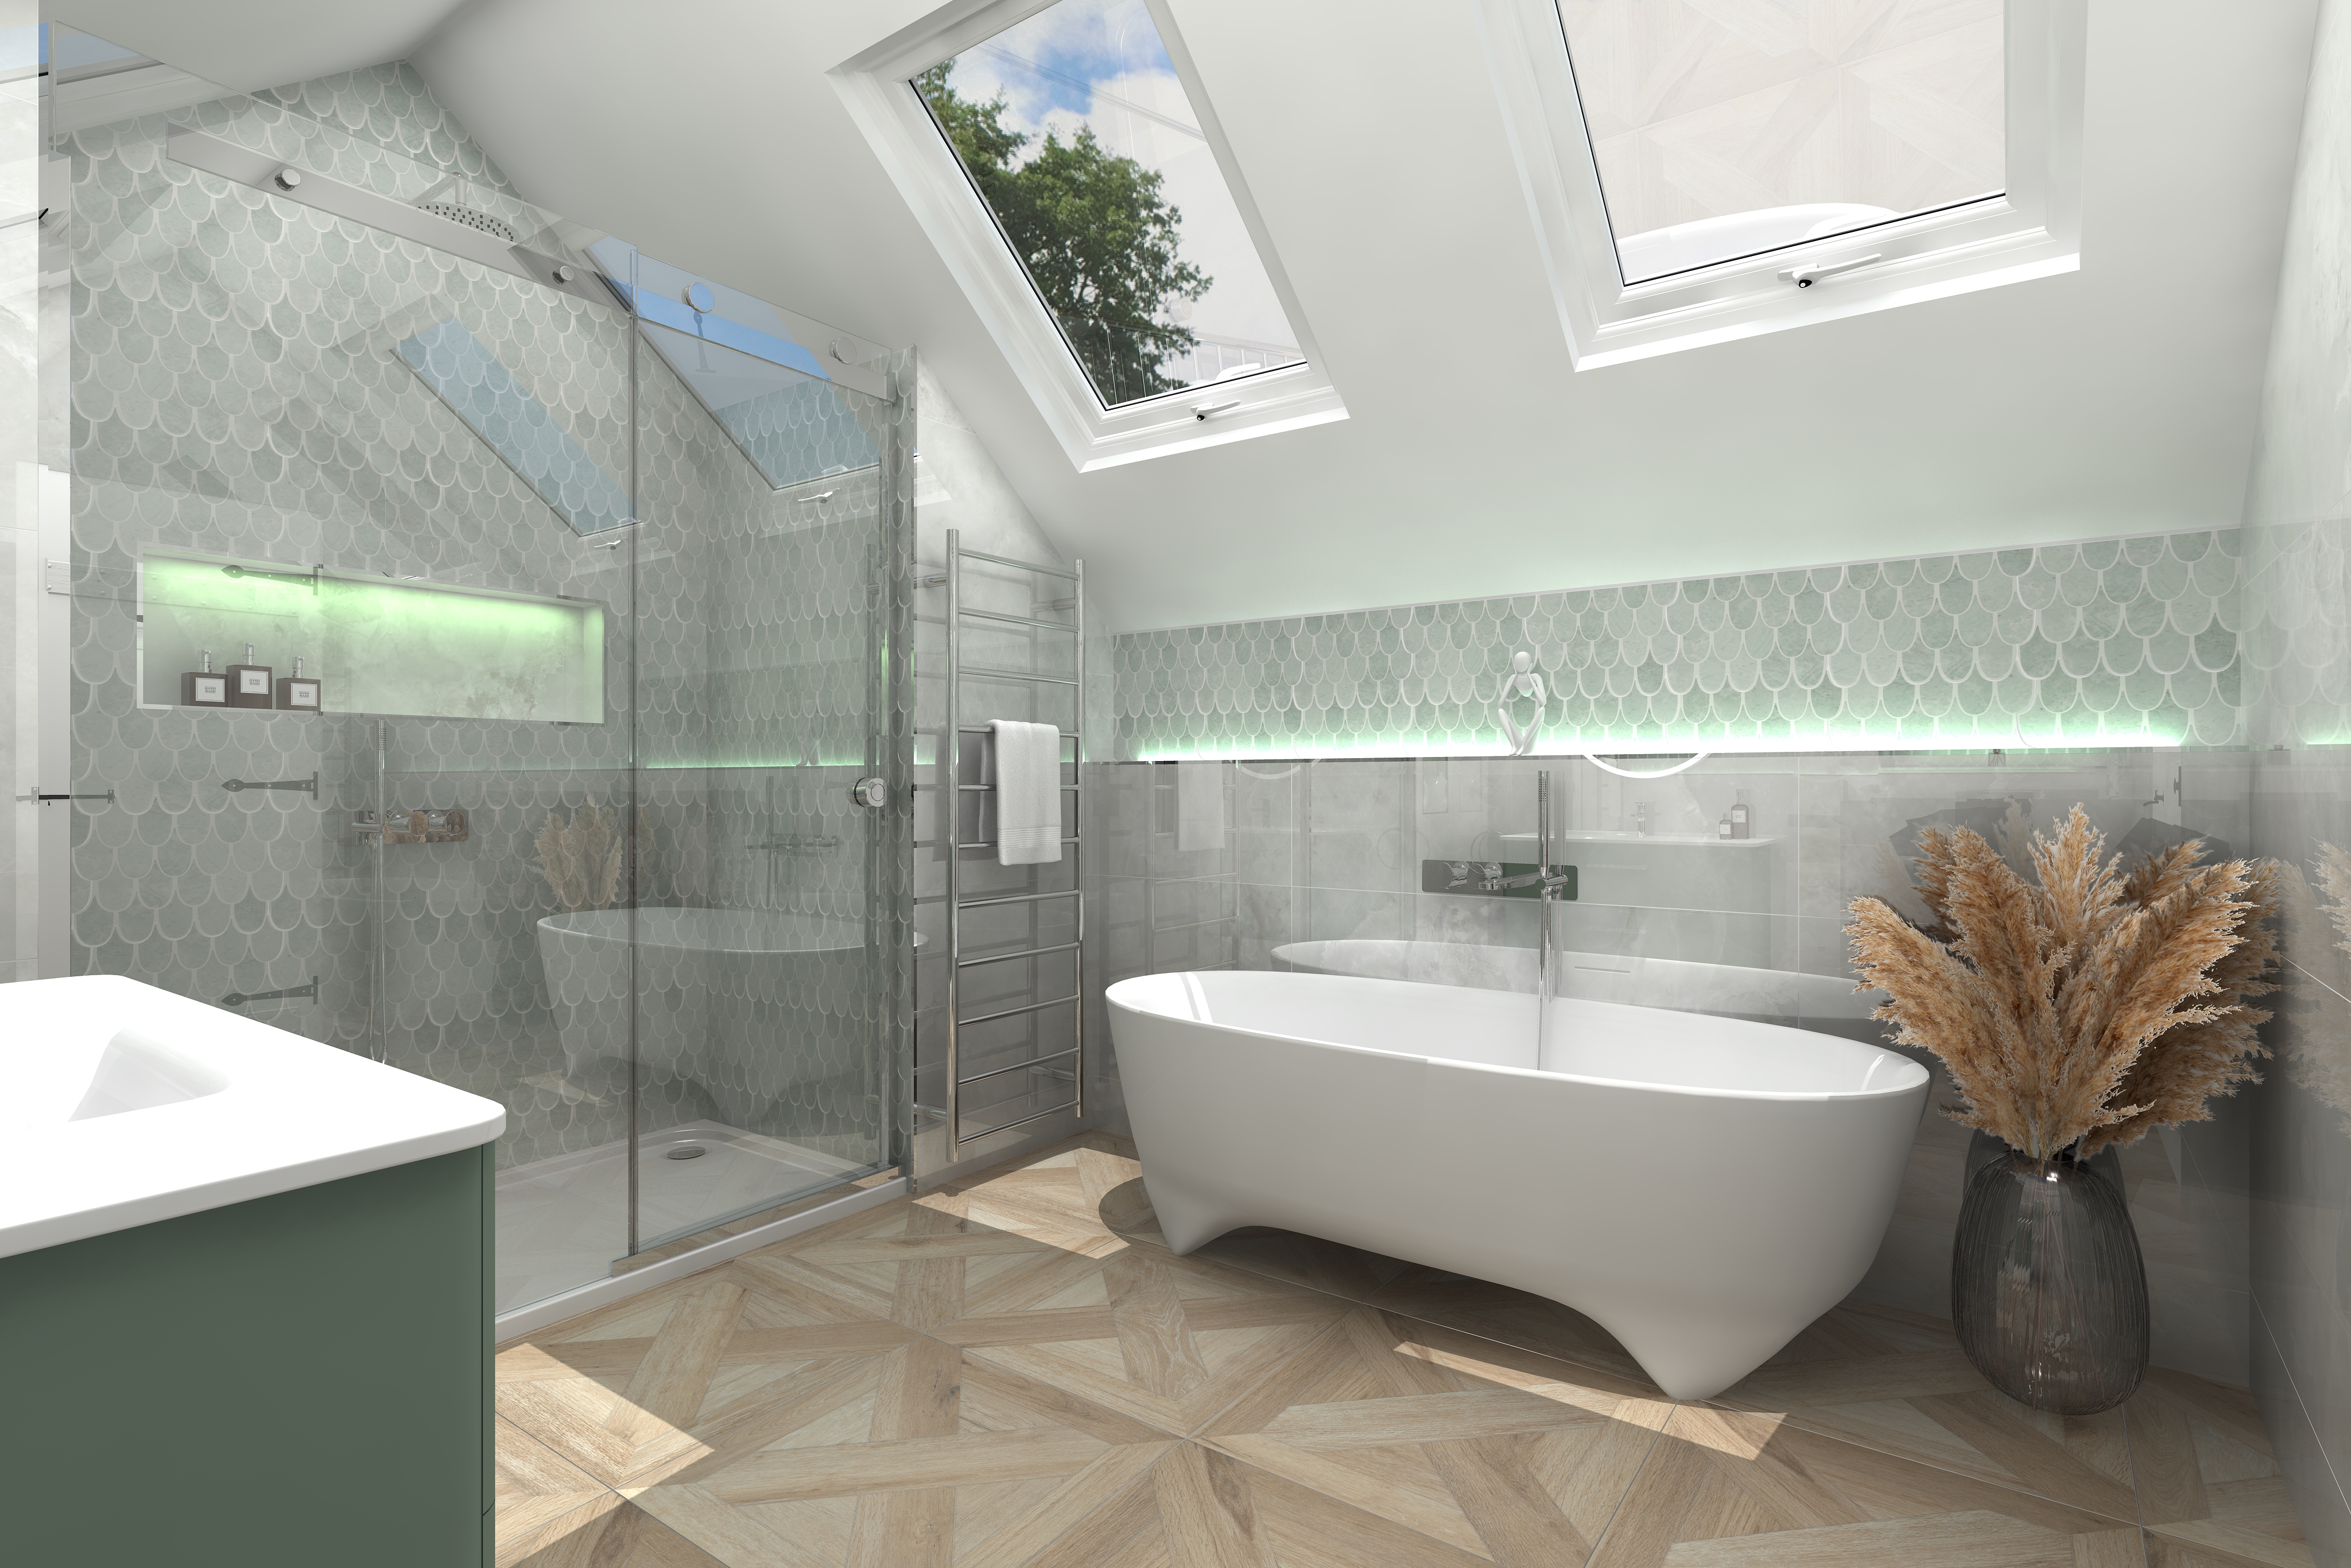 Digital lifestyle image of the Virgo inspired bathroom, with pale green scale effect wall tiles, acrylic shower tray, chrome radiator, wall mounted chrome bath filler and handset shower, double ended bath with modern feet, large glass vase with pampas grass and an integrated shelf with a 'Hear No Evil' statue